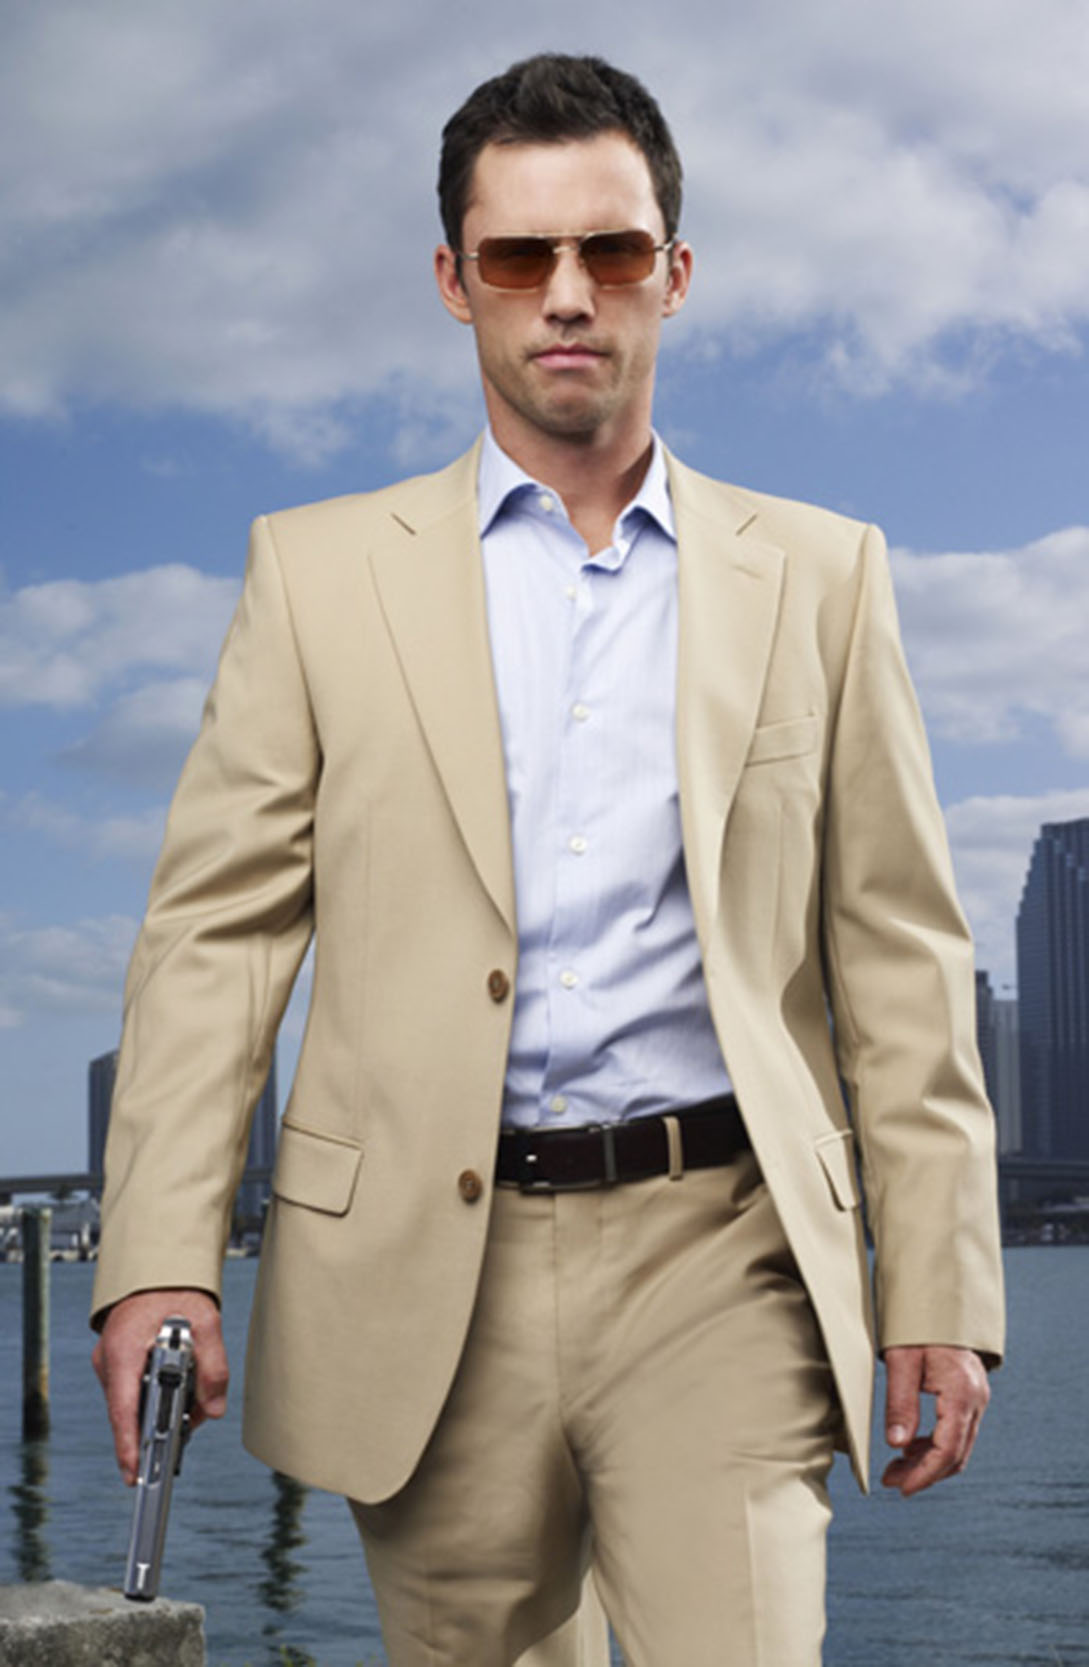 -Victory-Jeffrey-Donovan-oliver-peoples-sunglasses_the+spectacle-trolley+square-salt+lake+city-DebaDoTell